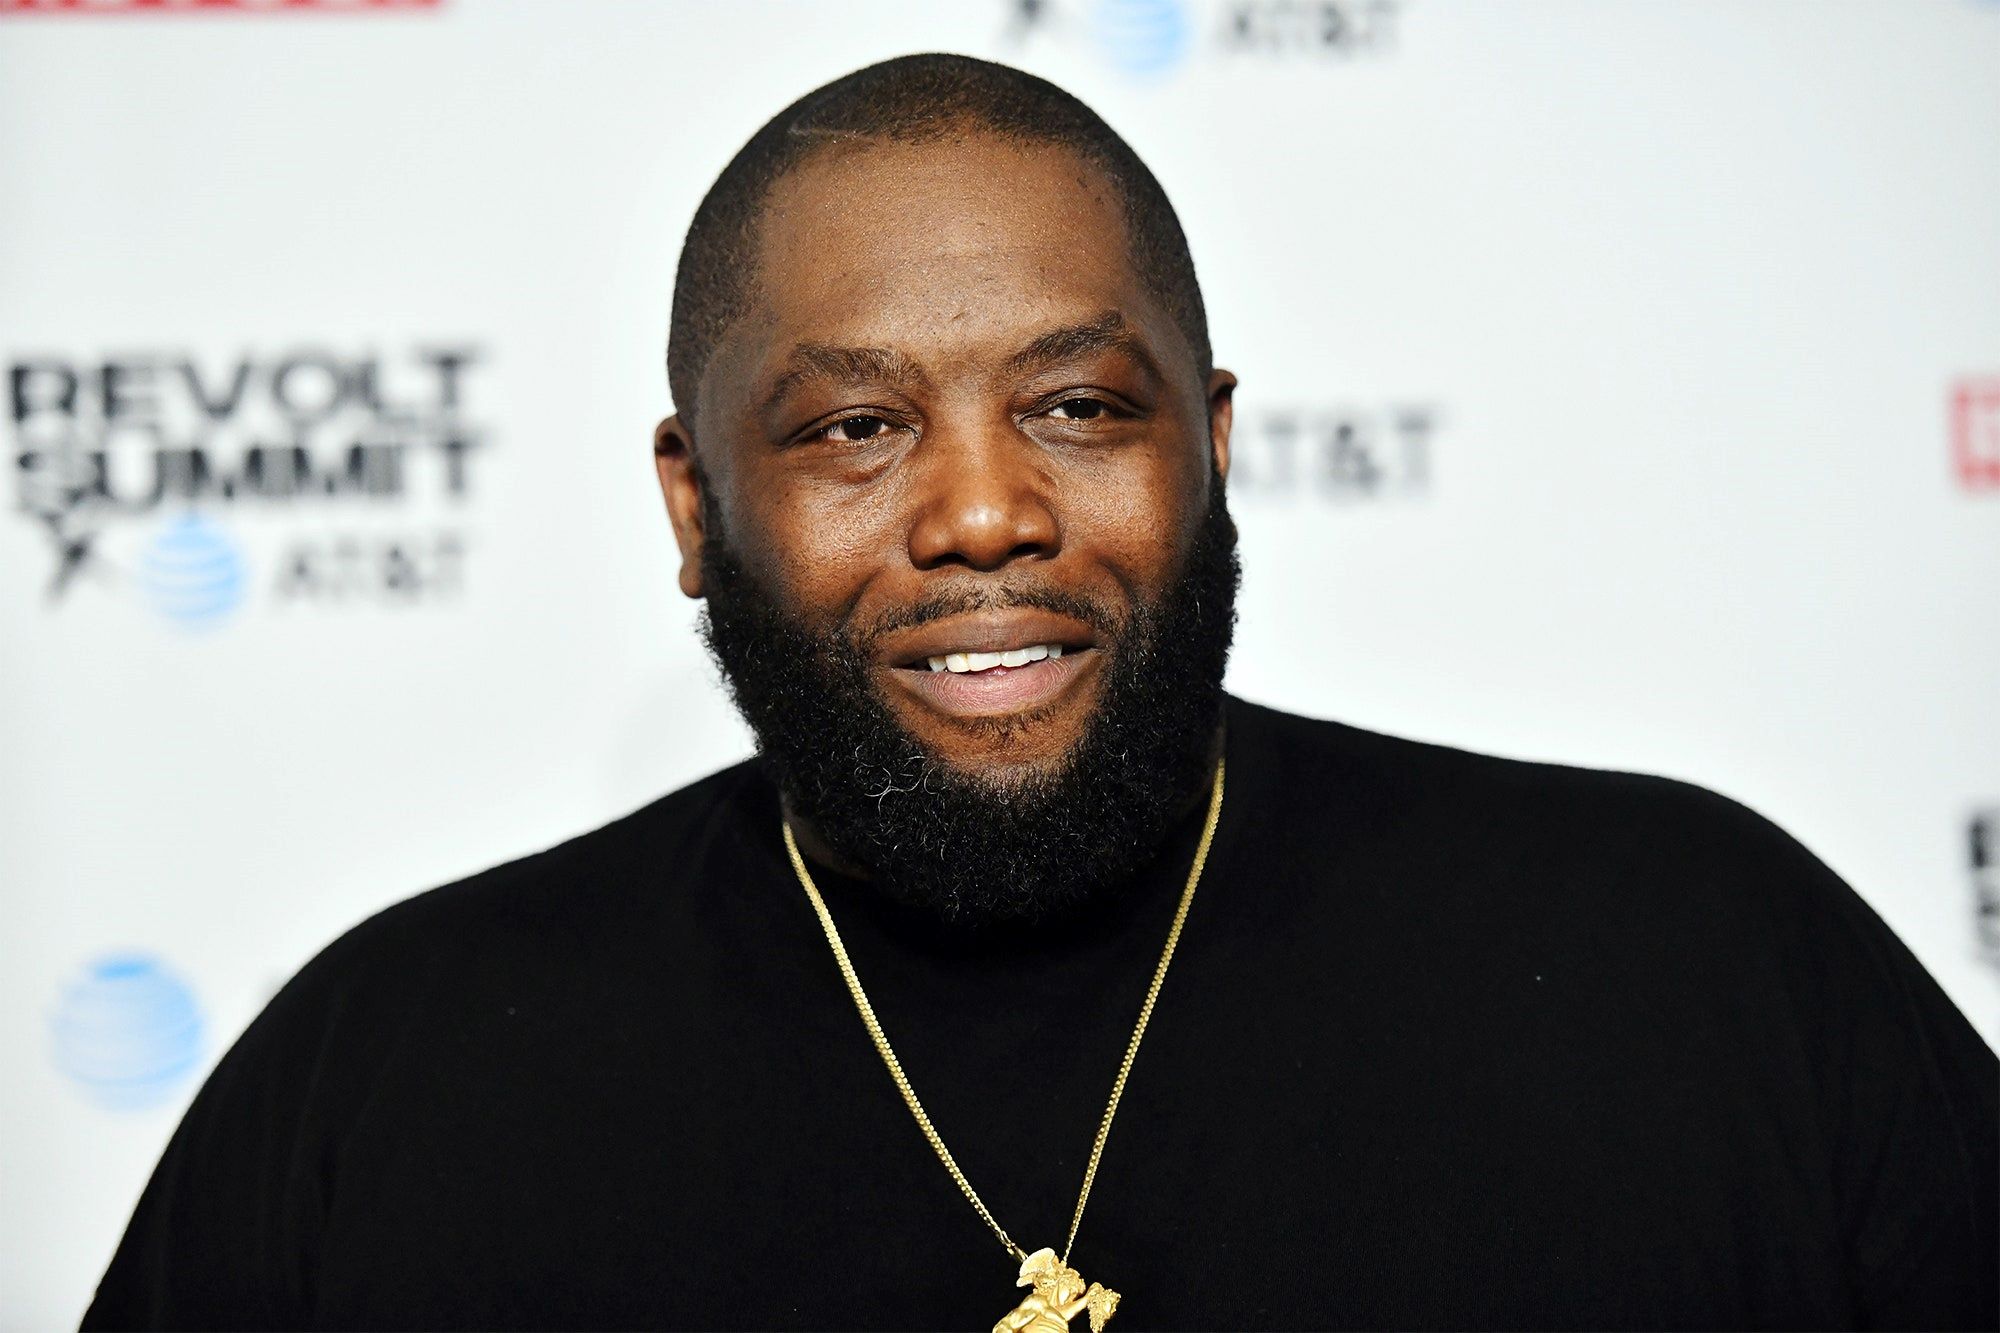 New Collaboration: Killer Mike Scores Young Nudy Feature Through Unconventional Means